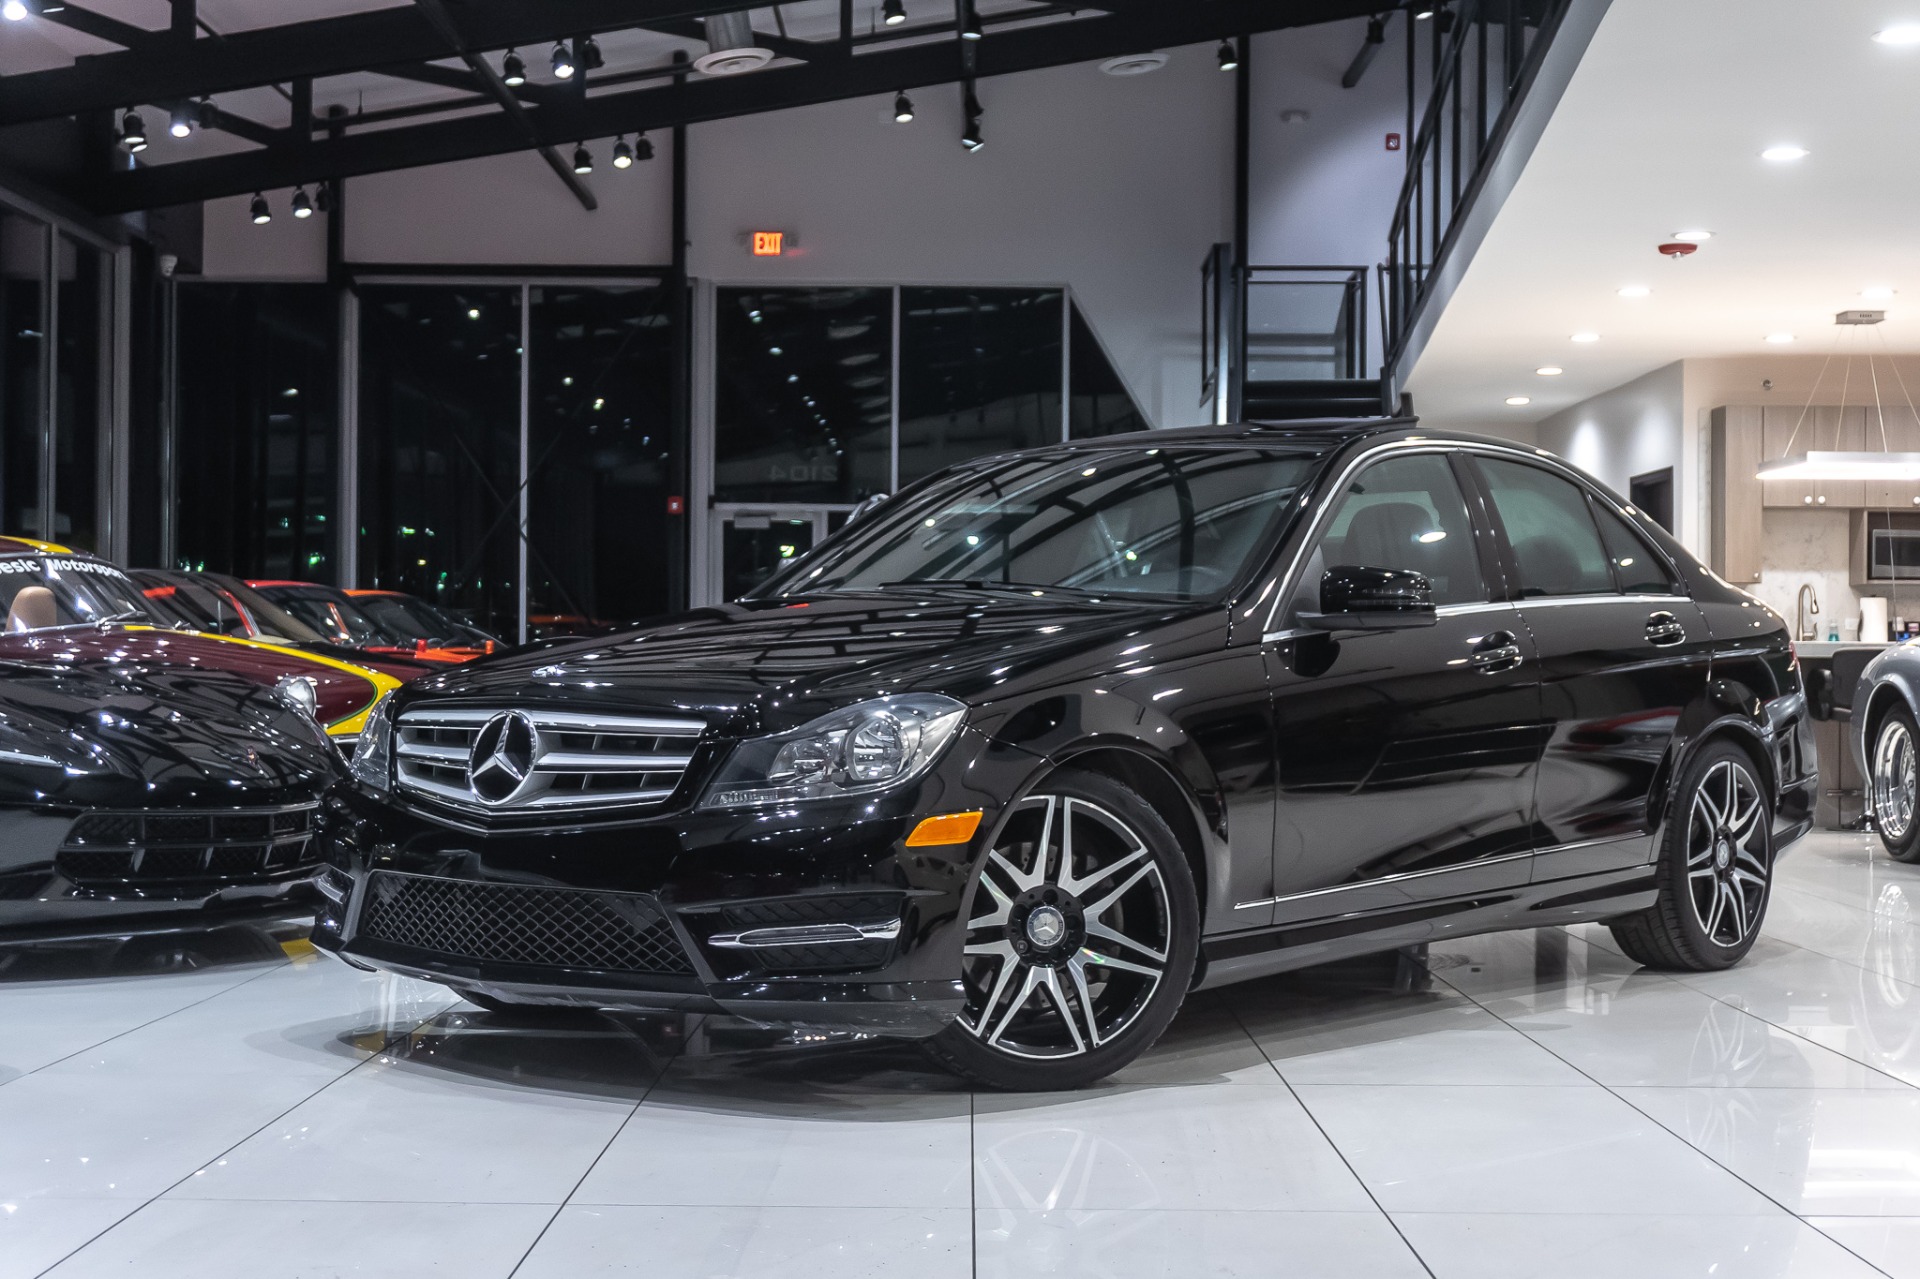 Used 2013 Mercedes-Benz C300 Sport 4MATIC AMG SPORT PKG! AMG STYLING ...